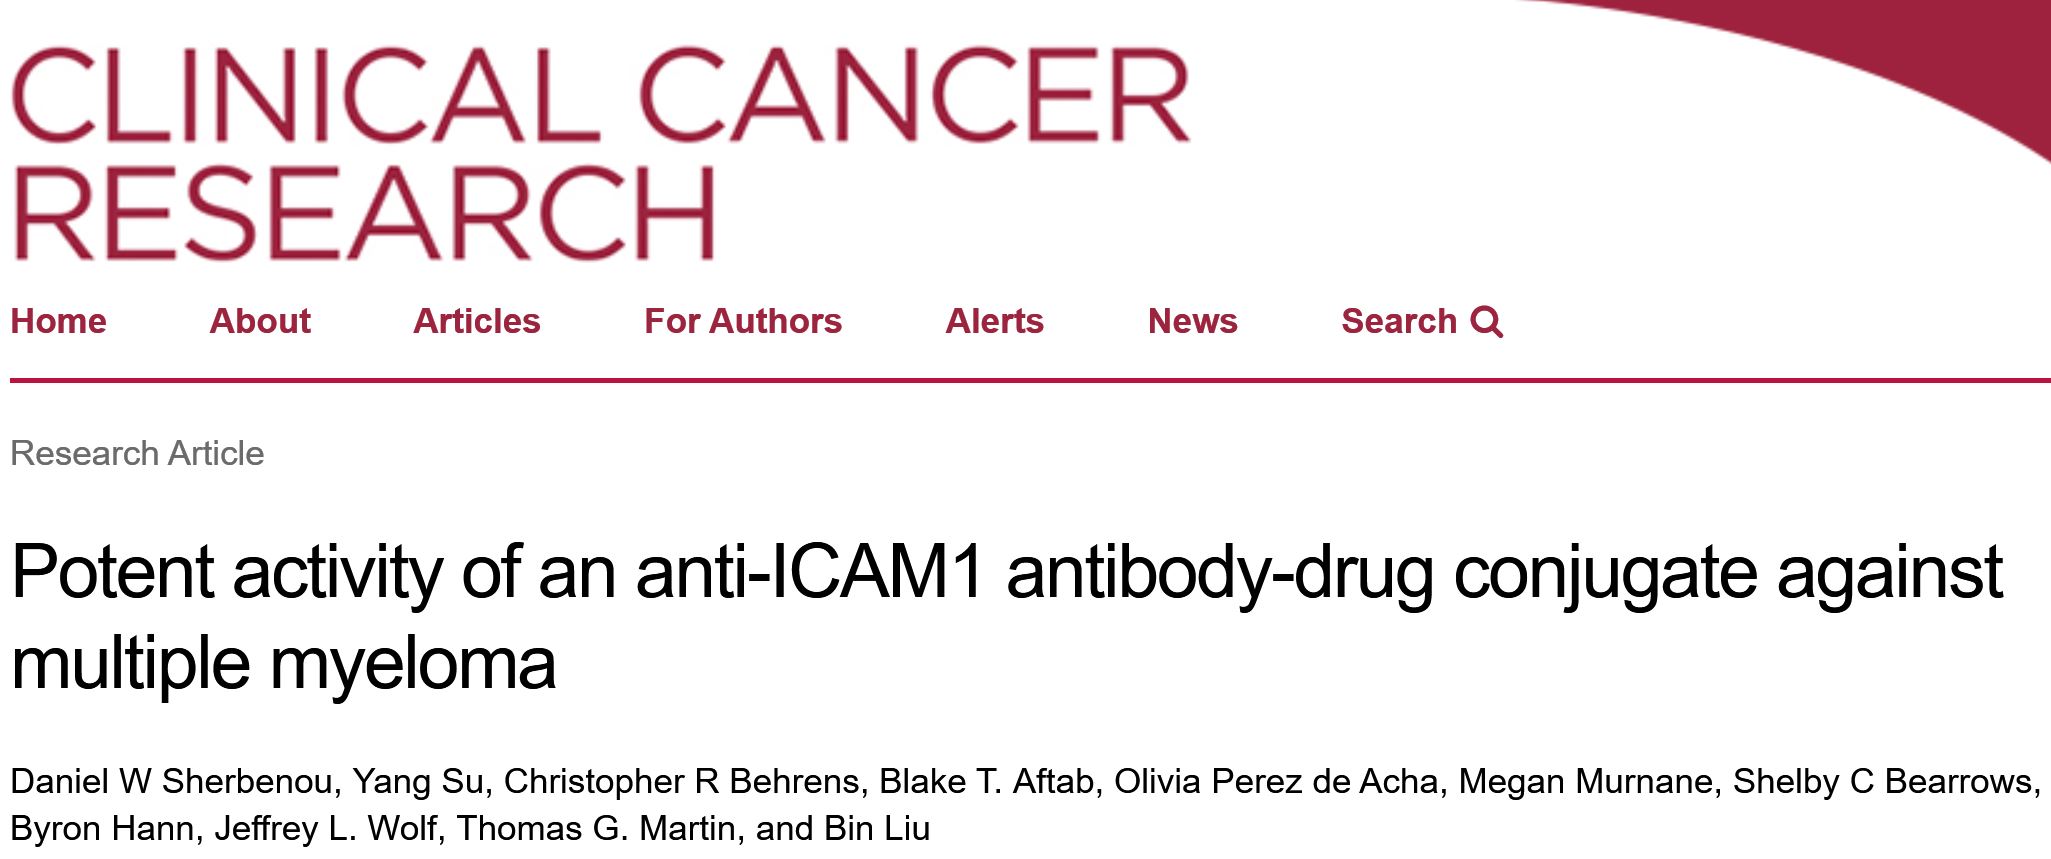 Clin Cancer Res：抗ICAM1<font color="red">抗体</font>-<font color="red">药物</font><font color="red">偶联</font><font color="red">物</font>用于多发性骨髓瘤的潜在活性